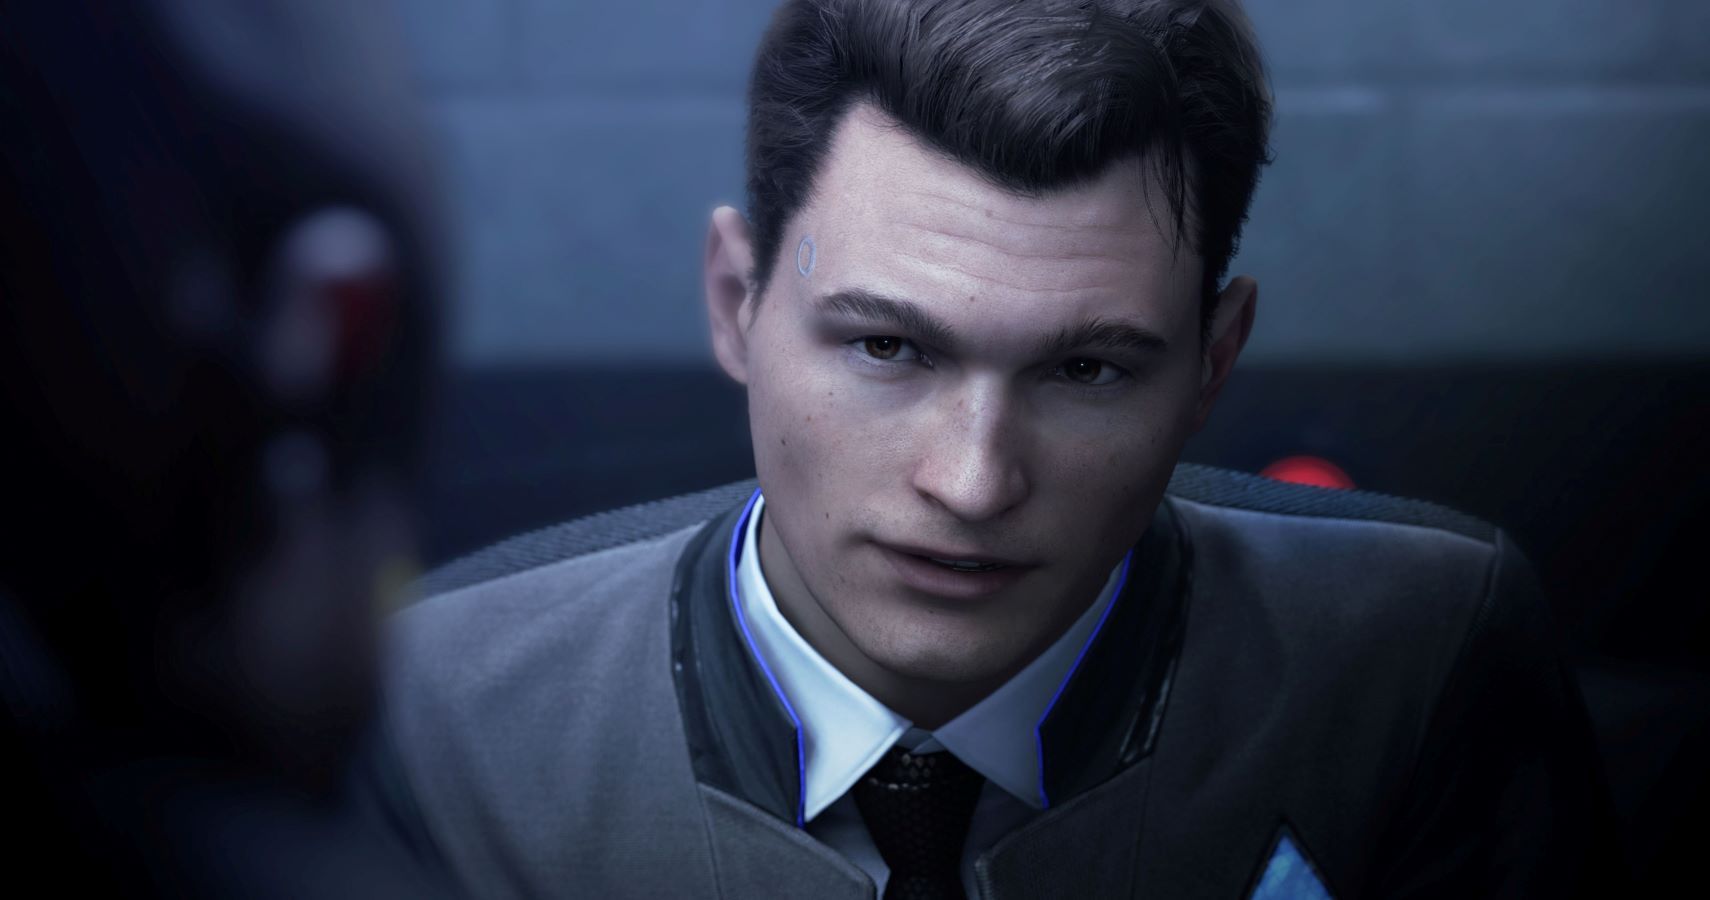 Detroit: Become Human system requirements